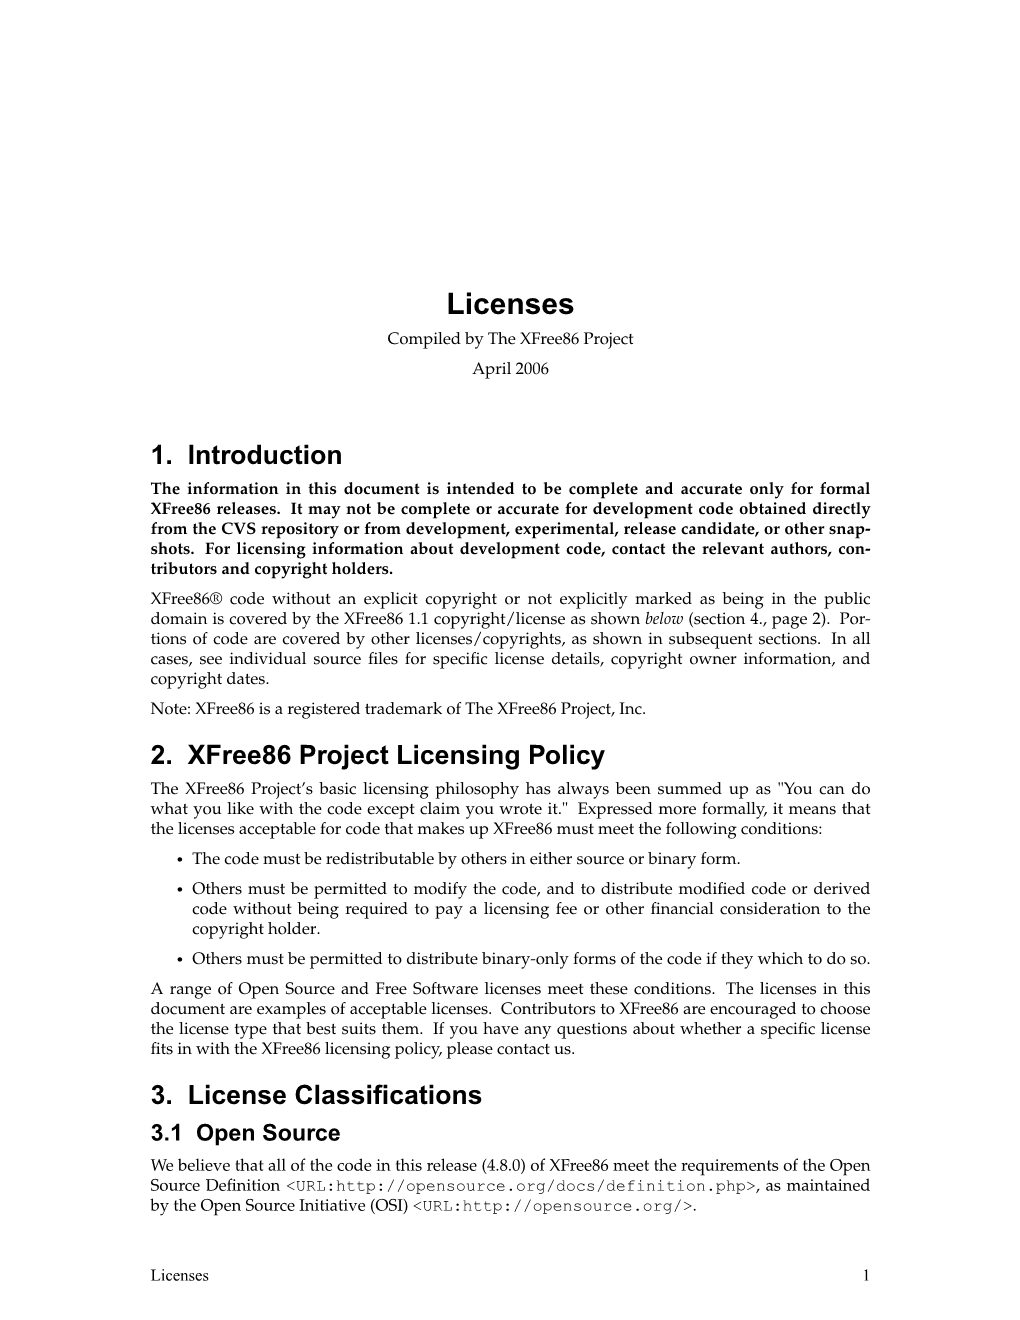 Licenses Compiled by the Xfree86 Project April 2006